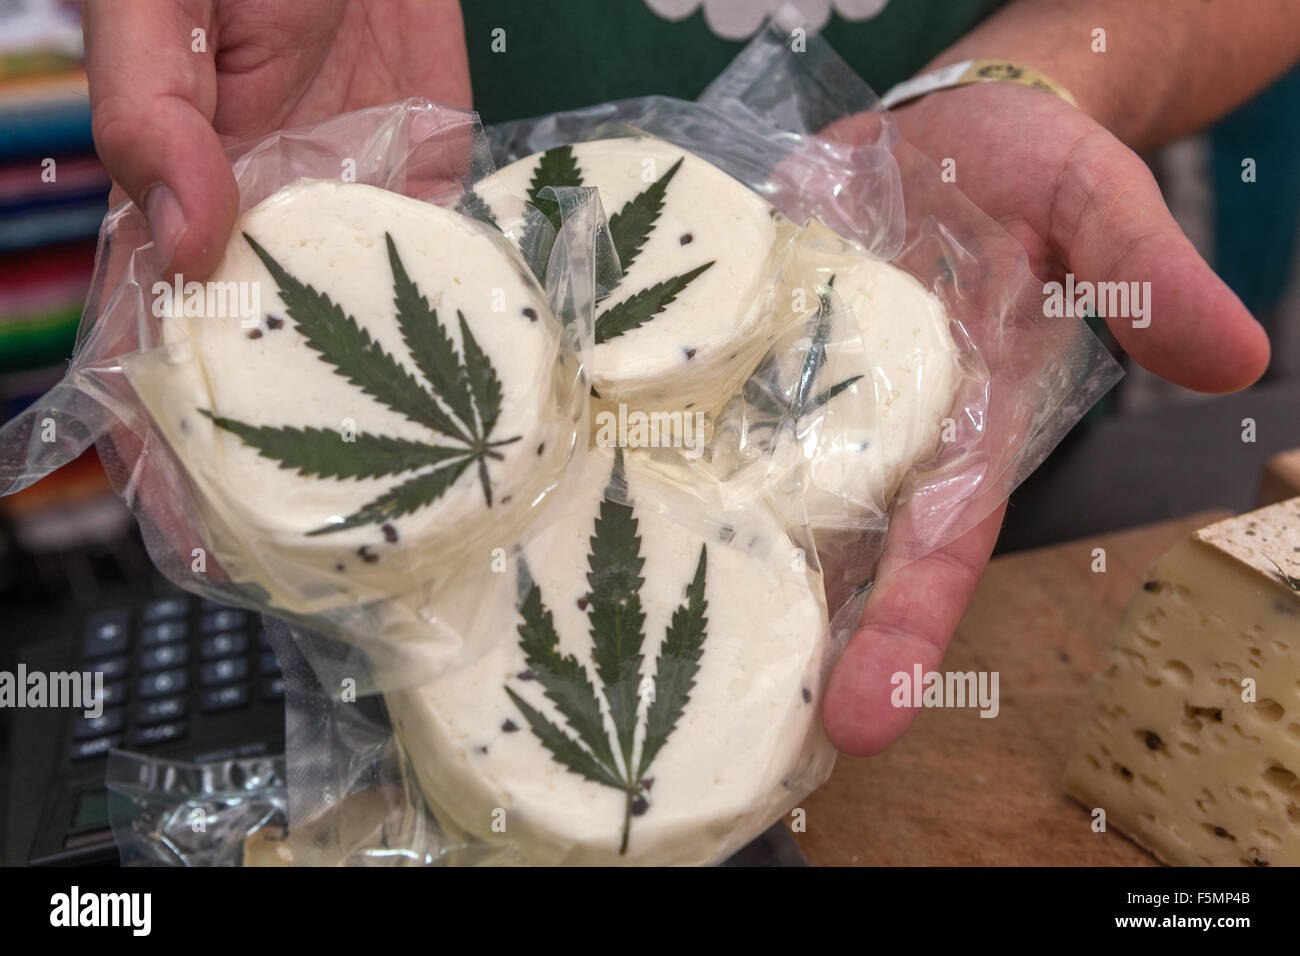 Sheep's cheese vacuum-packed, decorated with a cannabis leaf Prague Czech Republic Family farm product A man offers a product Stock Photo